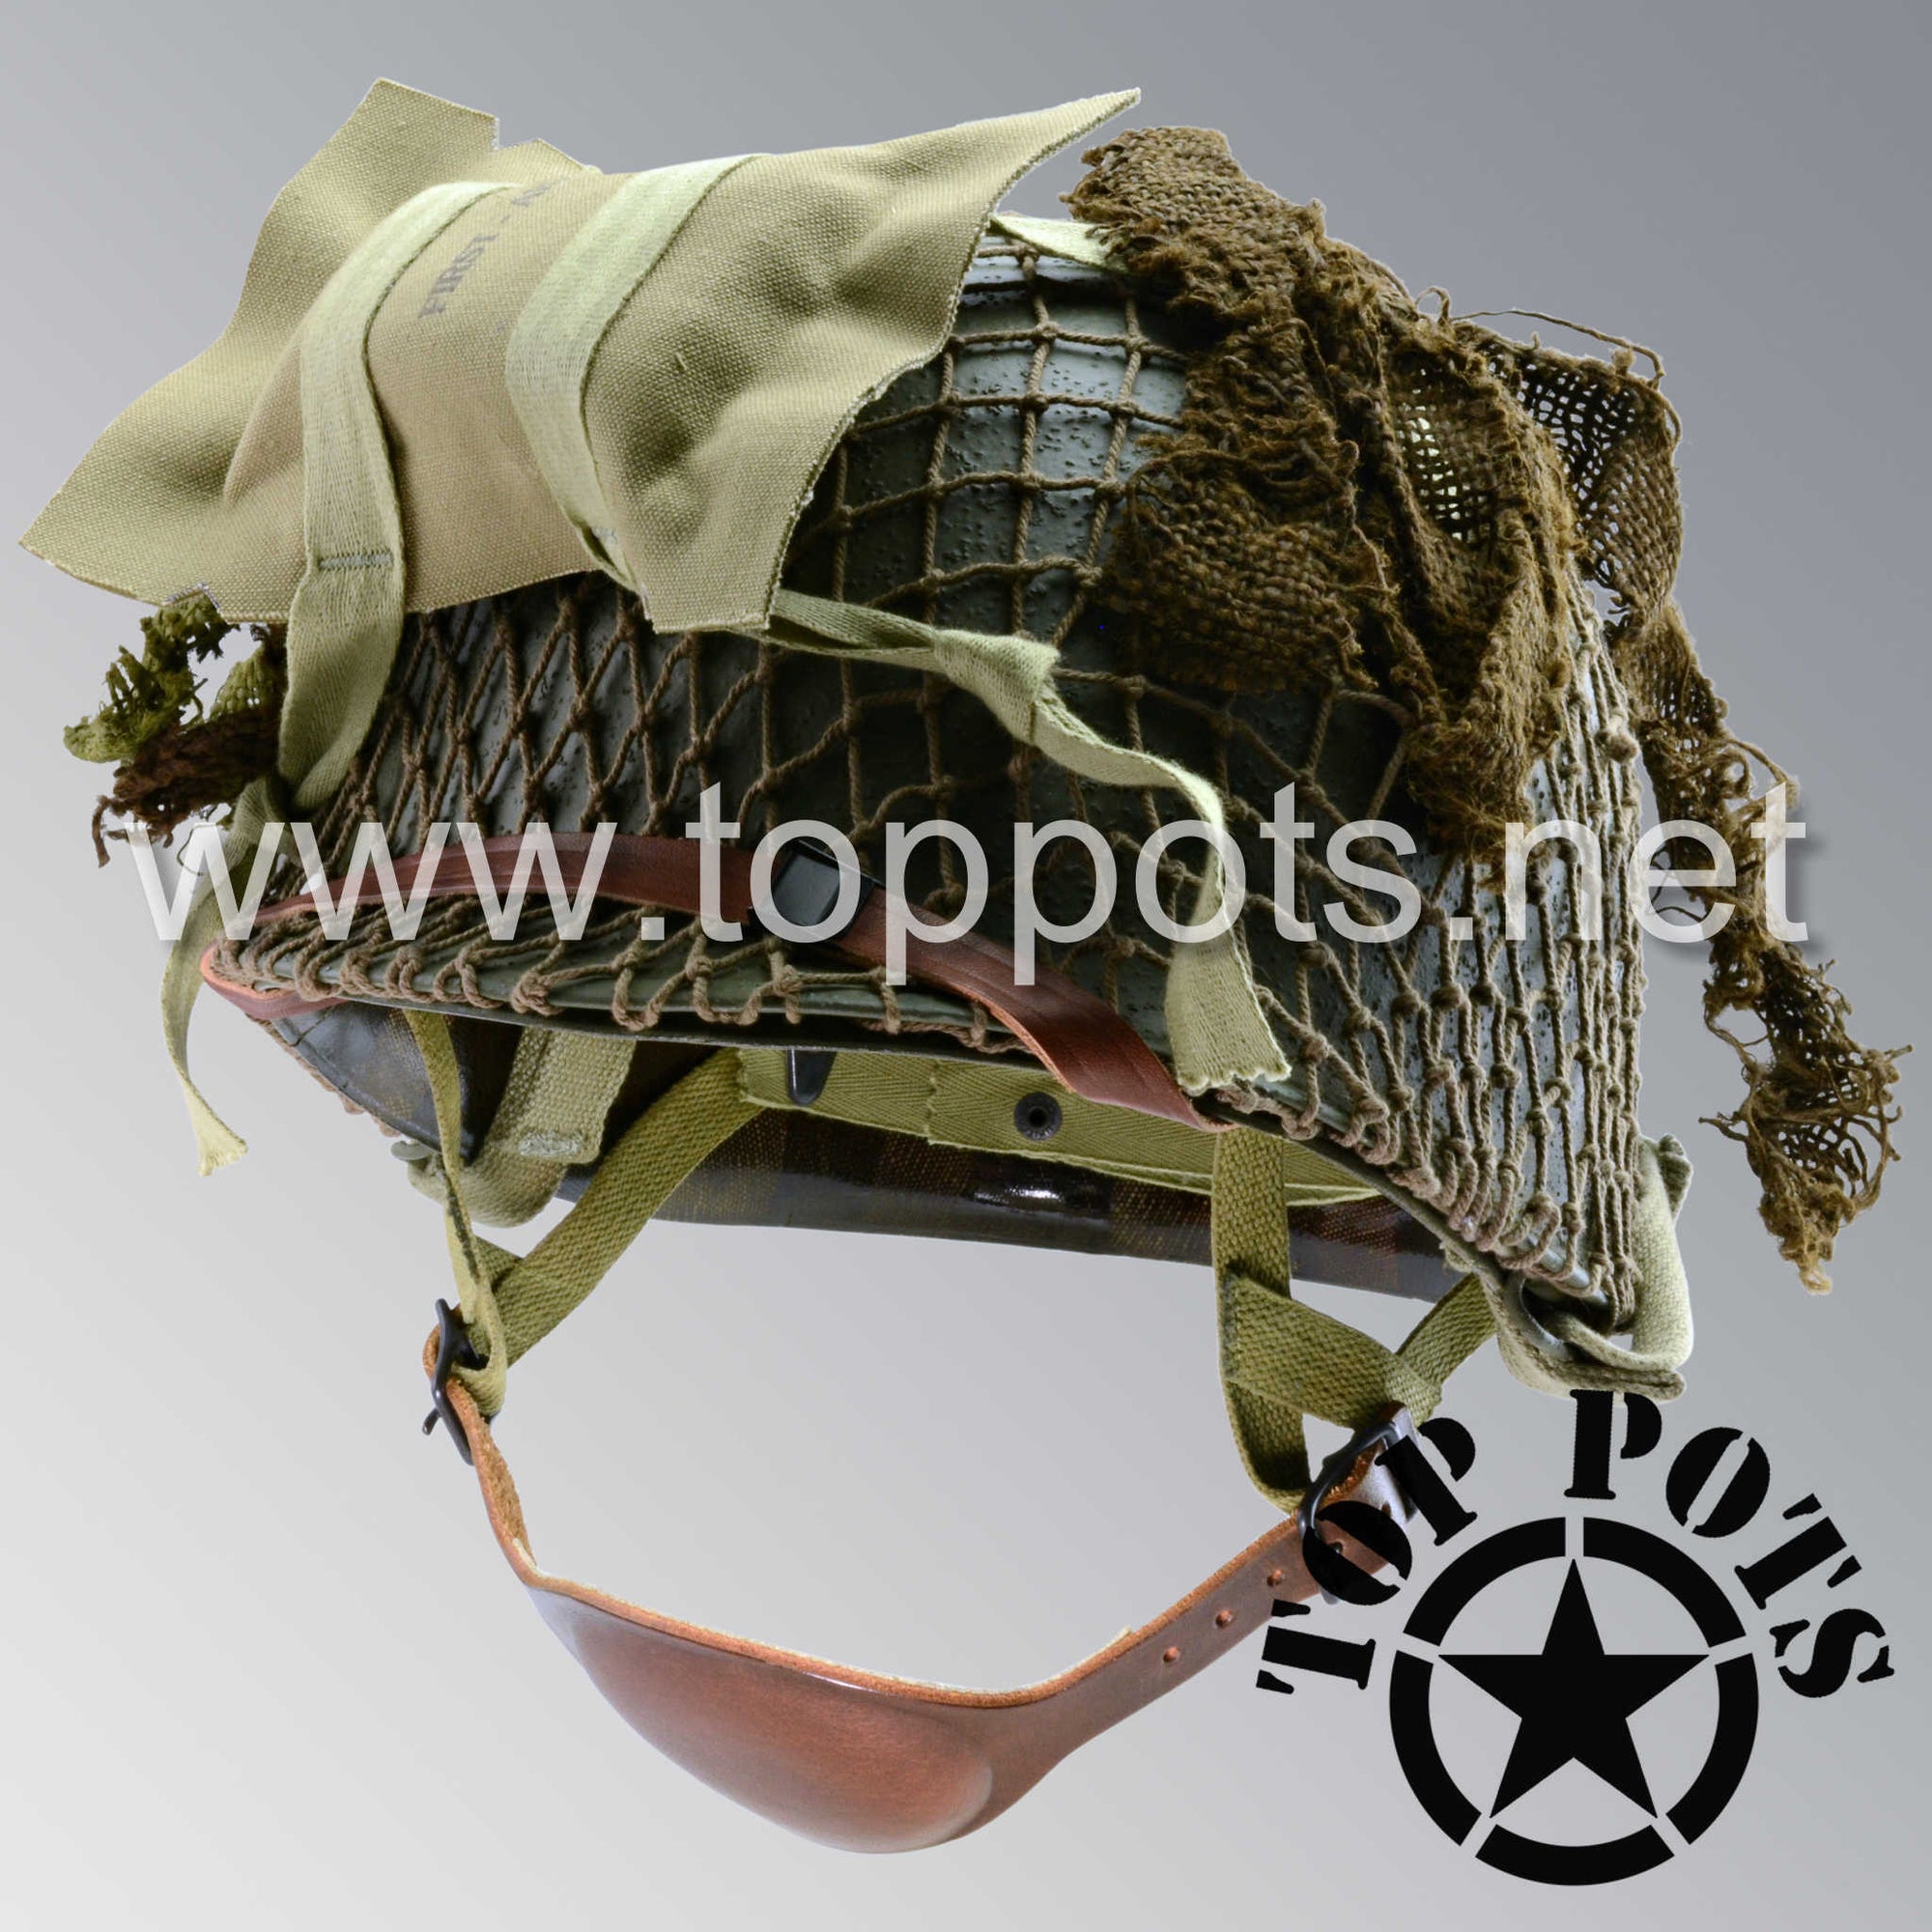 WWII US Army Restored Original M1C Paratrooper Airborne Helmet Swivel Bale Shell and Liner with Net, Scrim and Medic Pack